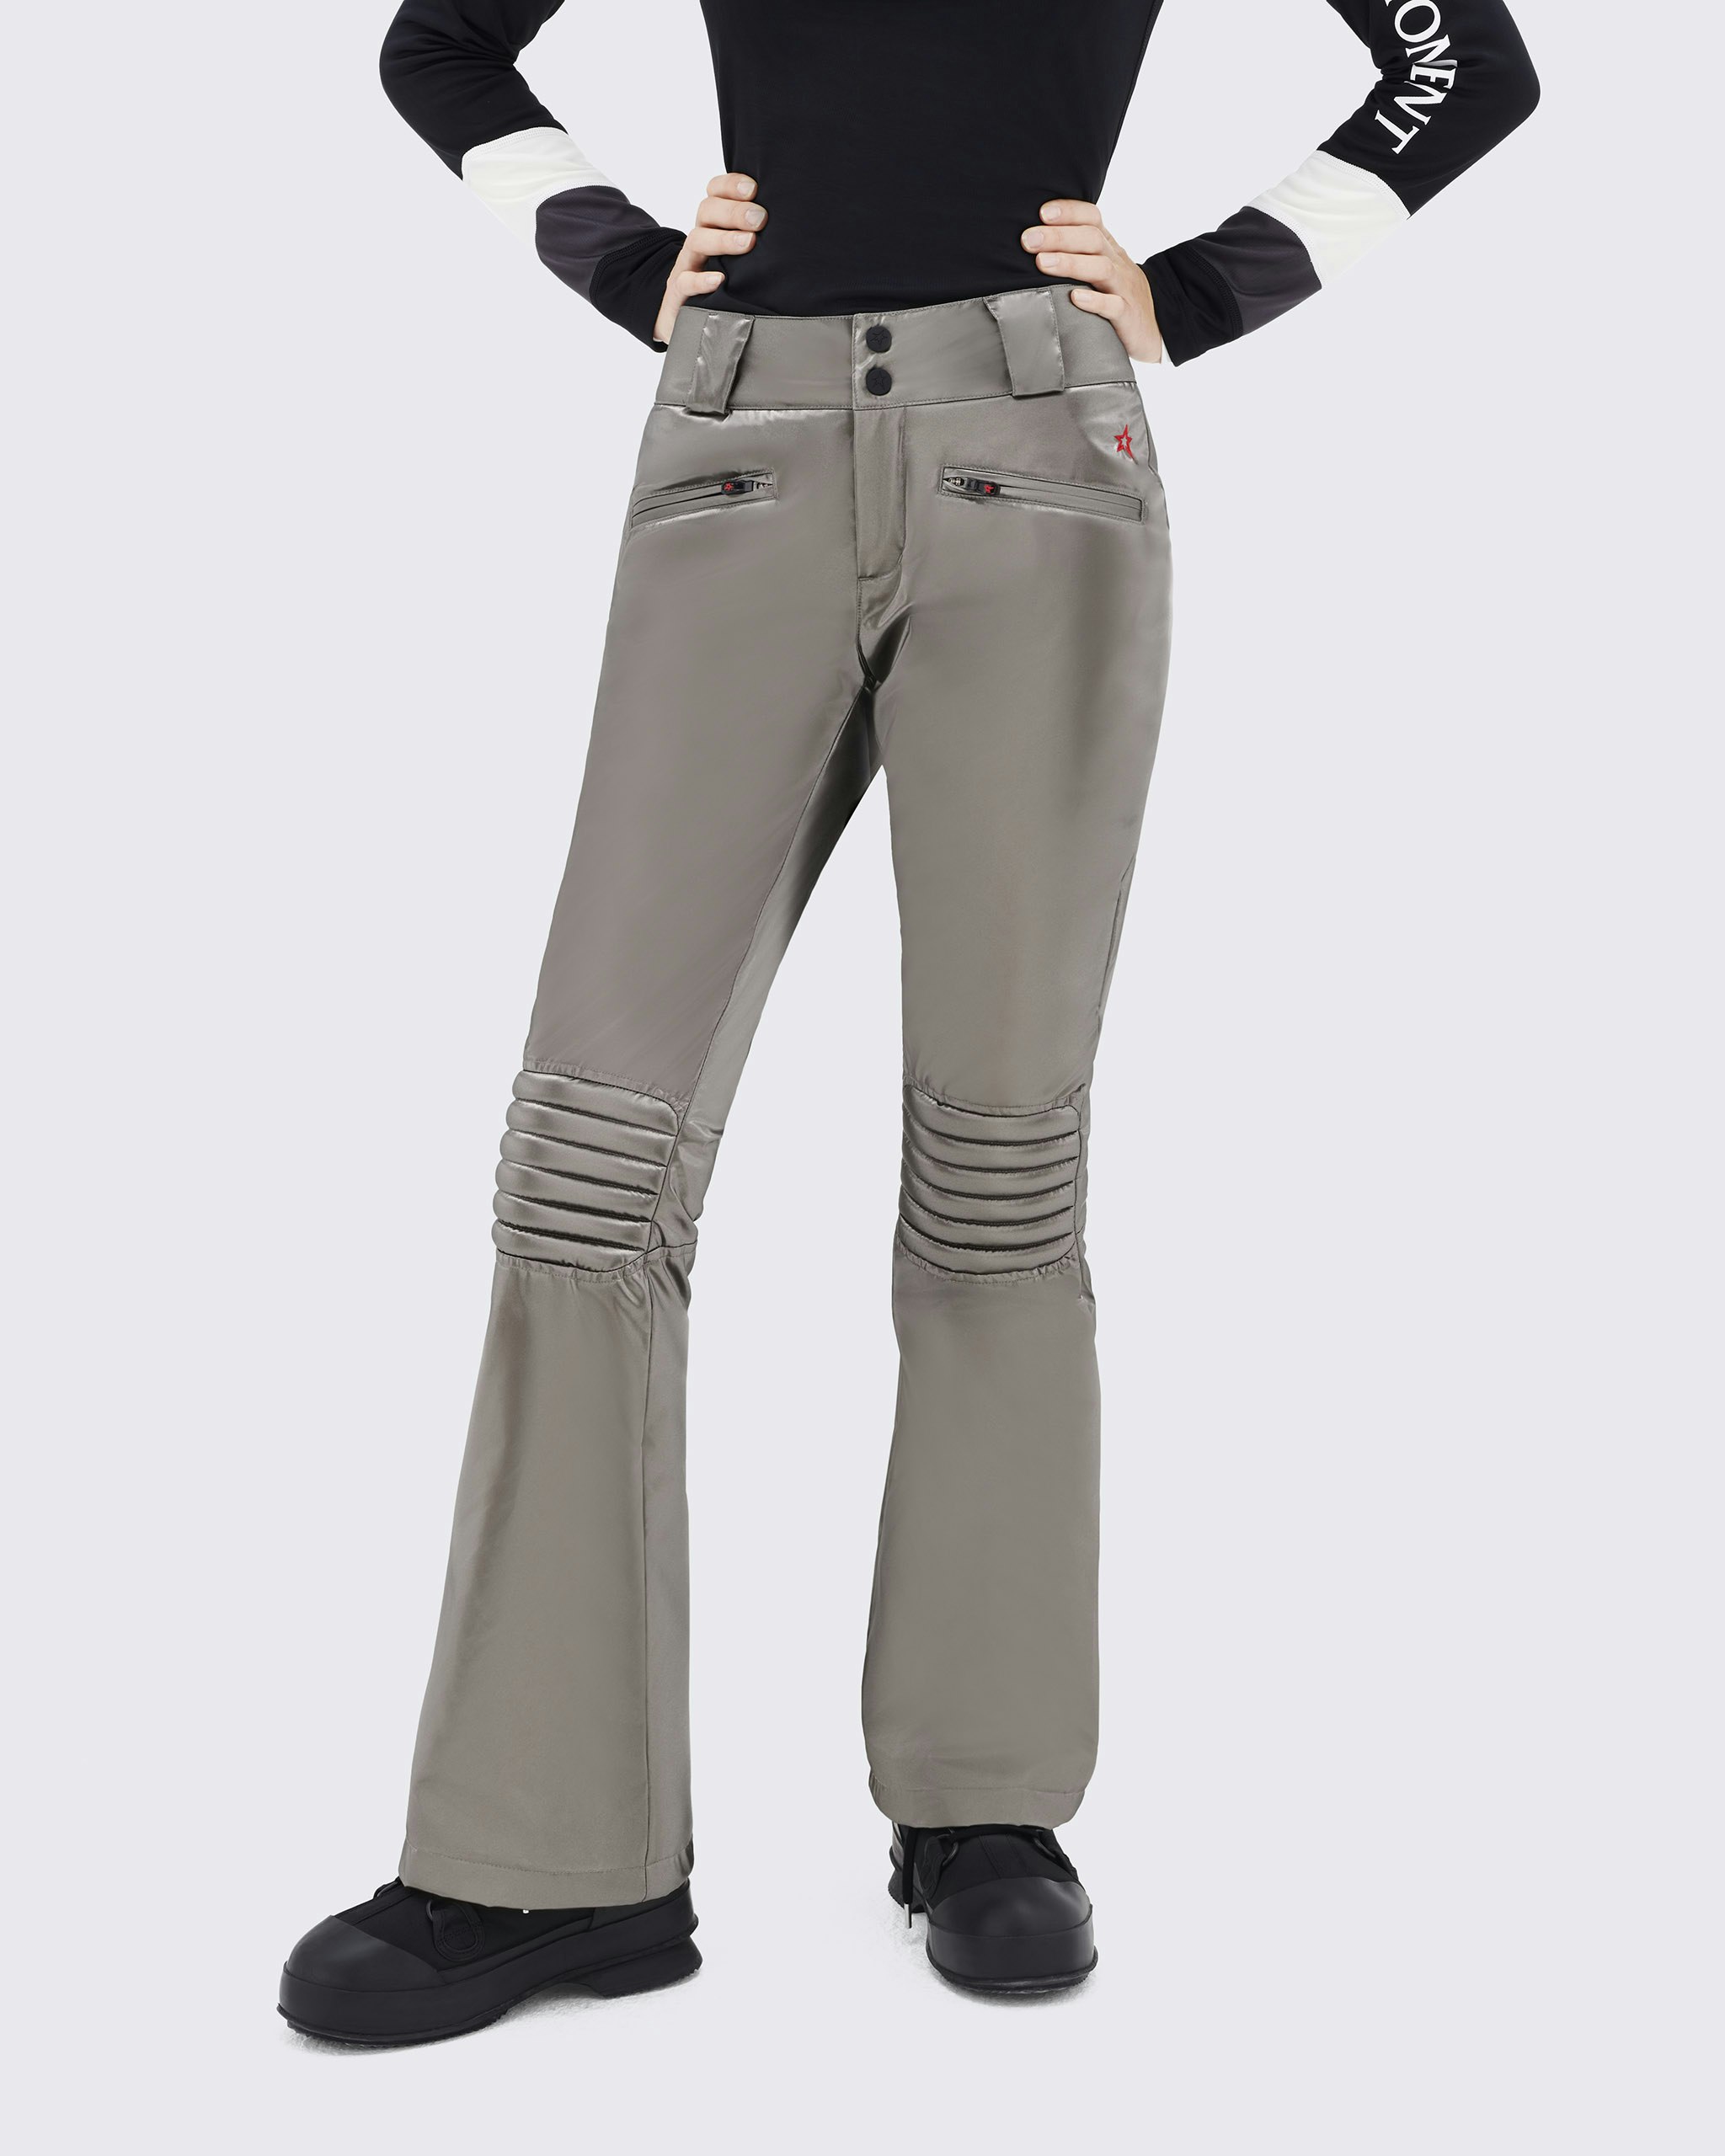 Houndstooth Mid-Rise Aurora Flare Pant